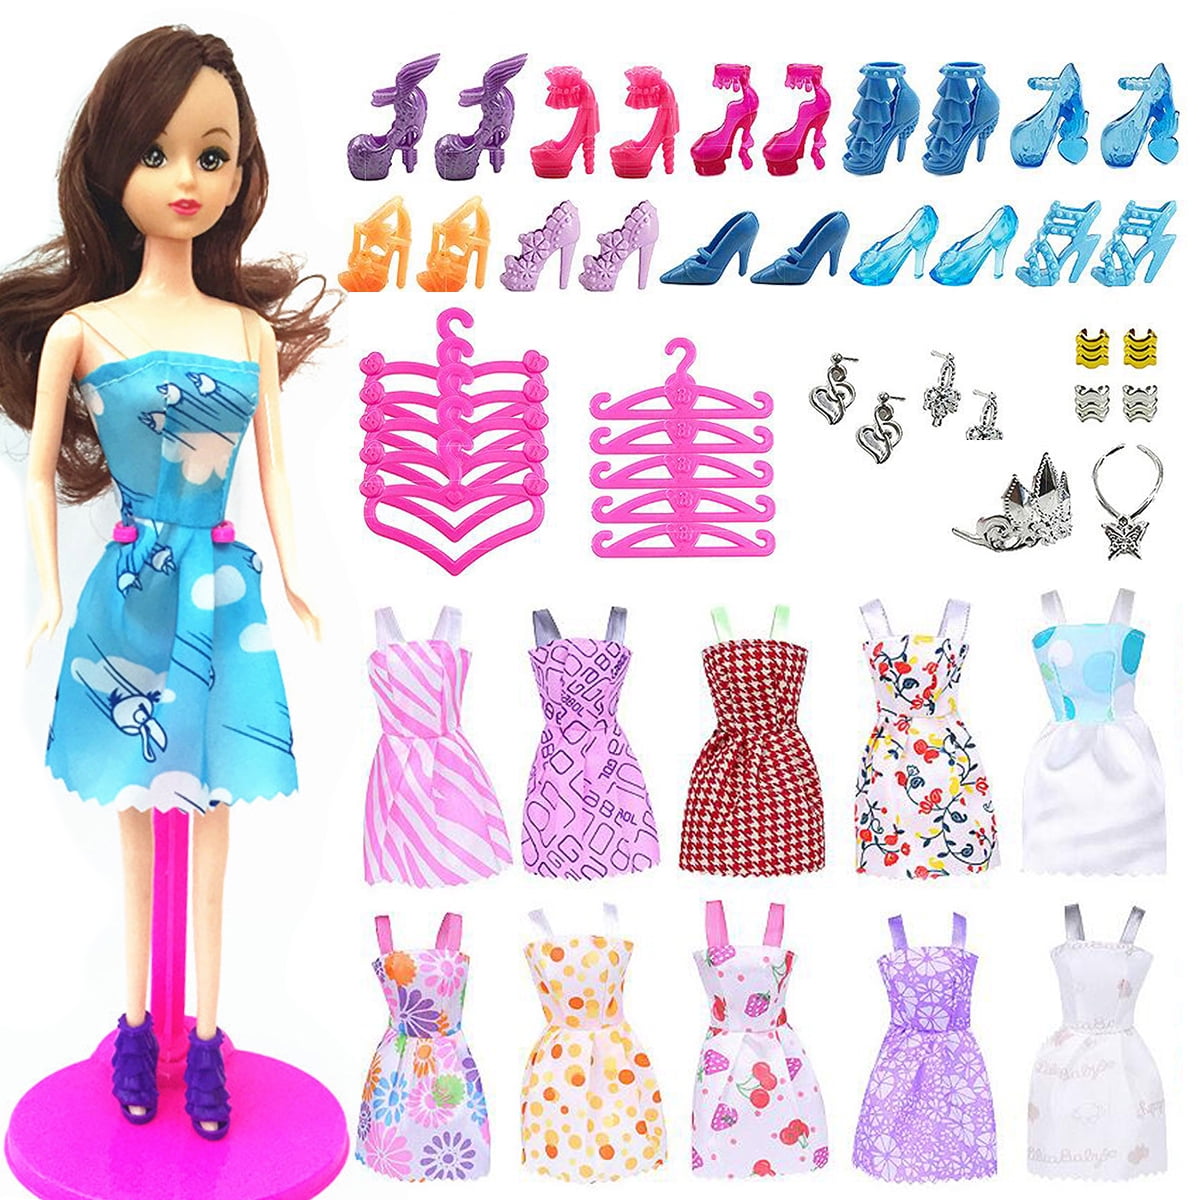 doll clothes and shoes